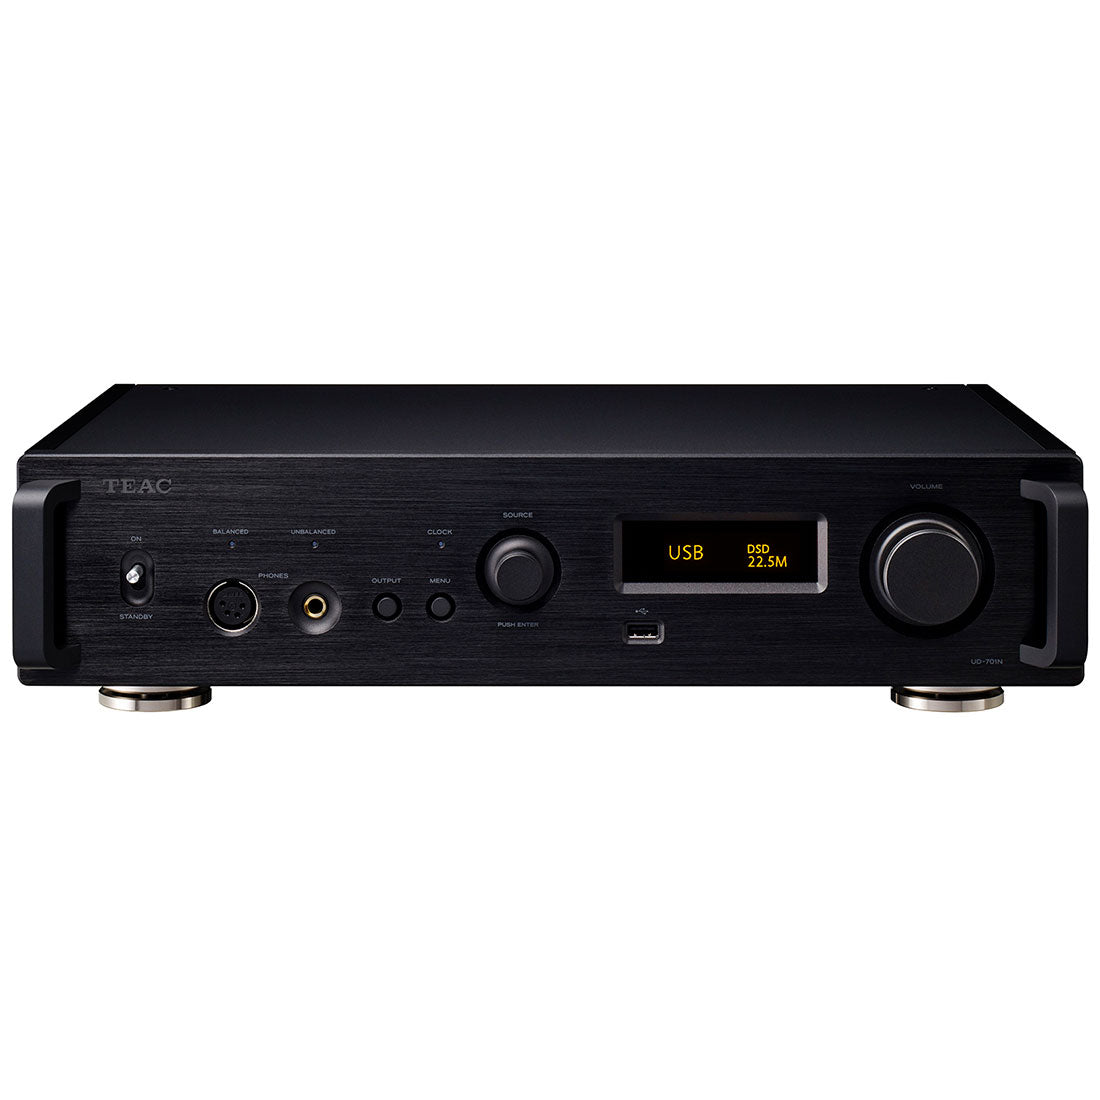 TEAC UD701NB Reference 700 Series Network Audio Player